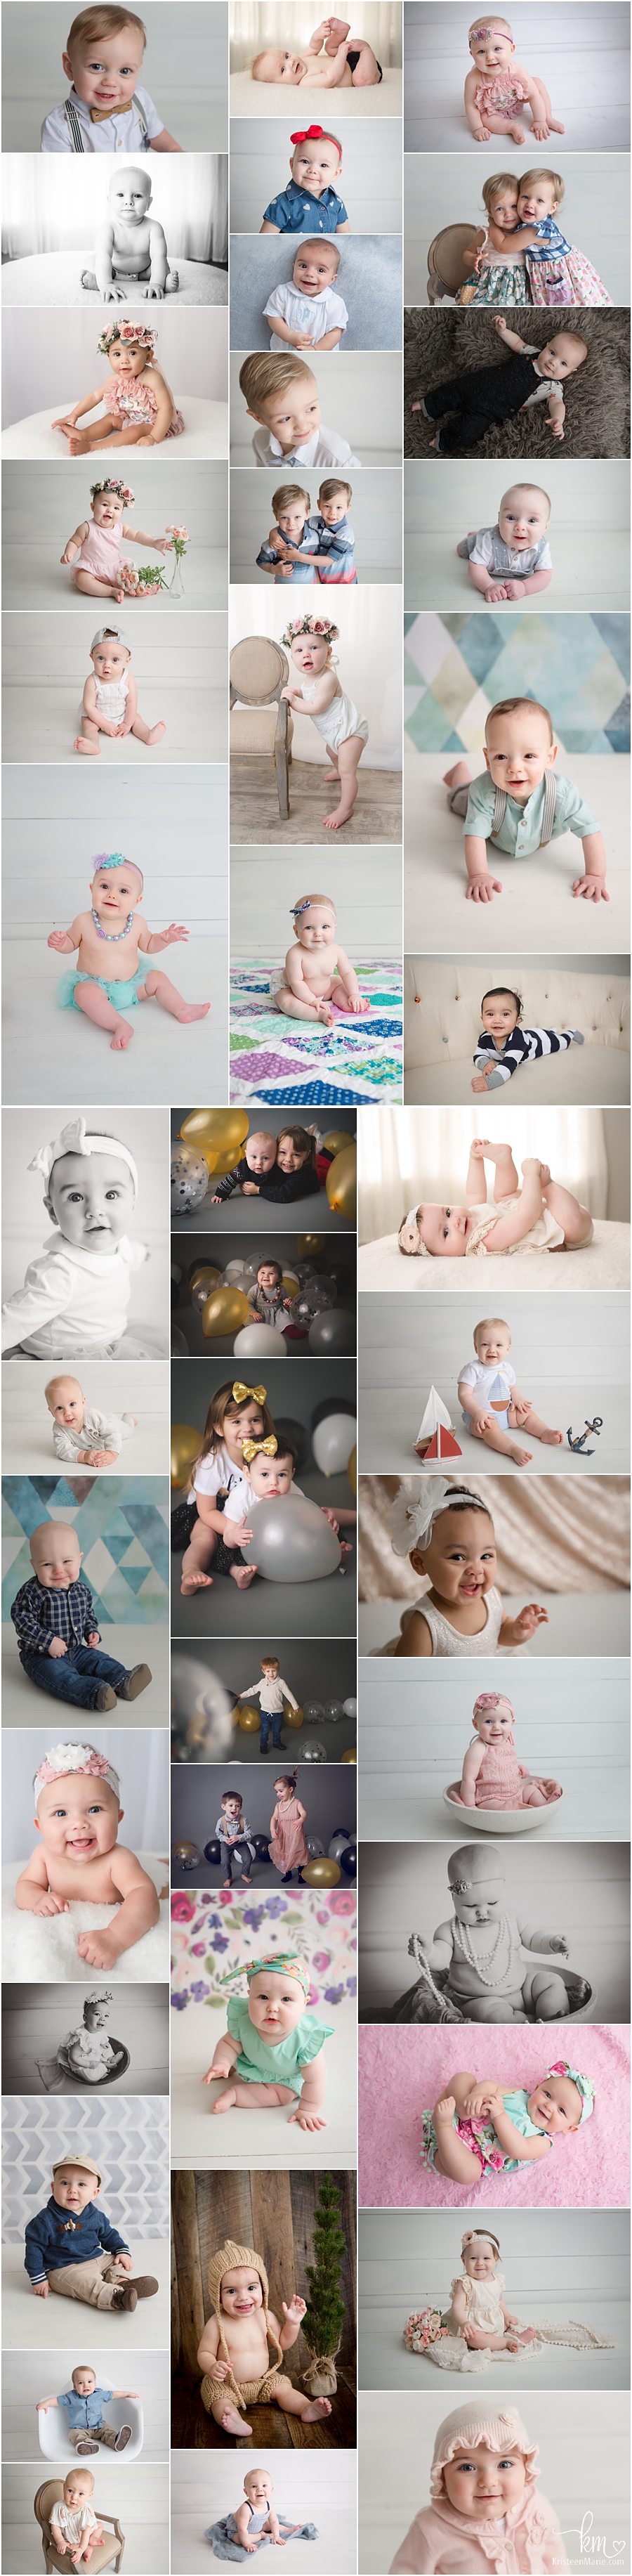 Studio Photography of Children in Indianapolis, Indiana